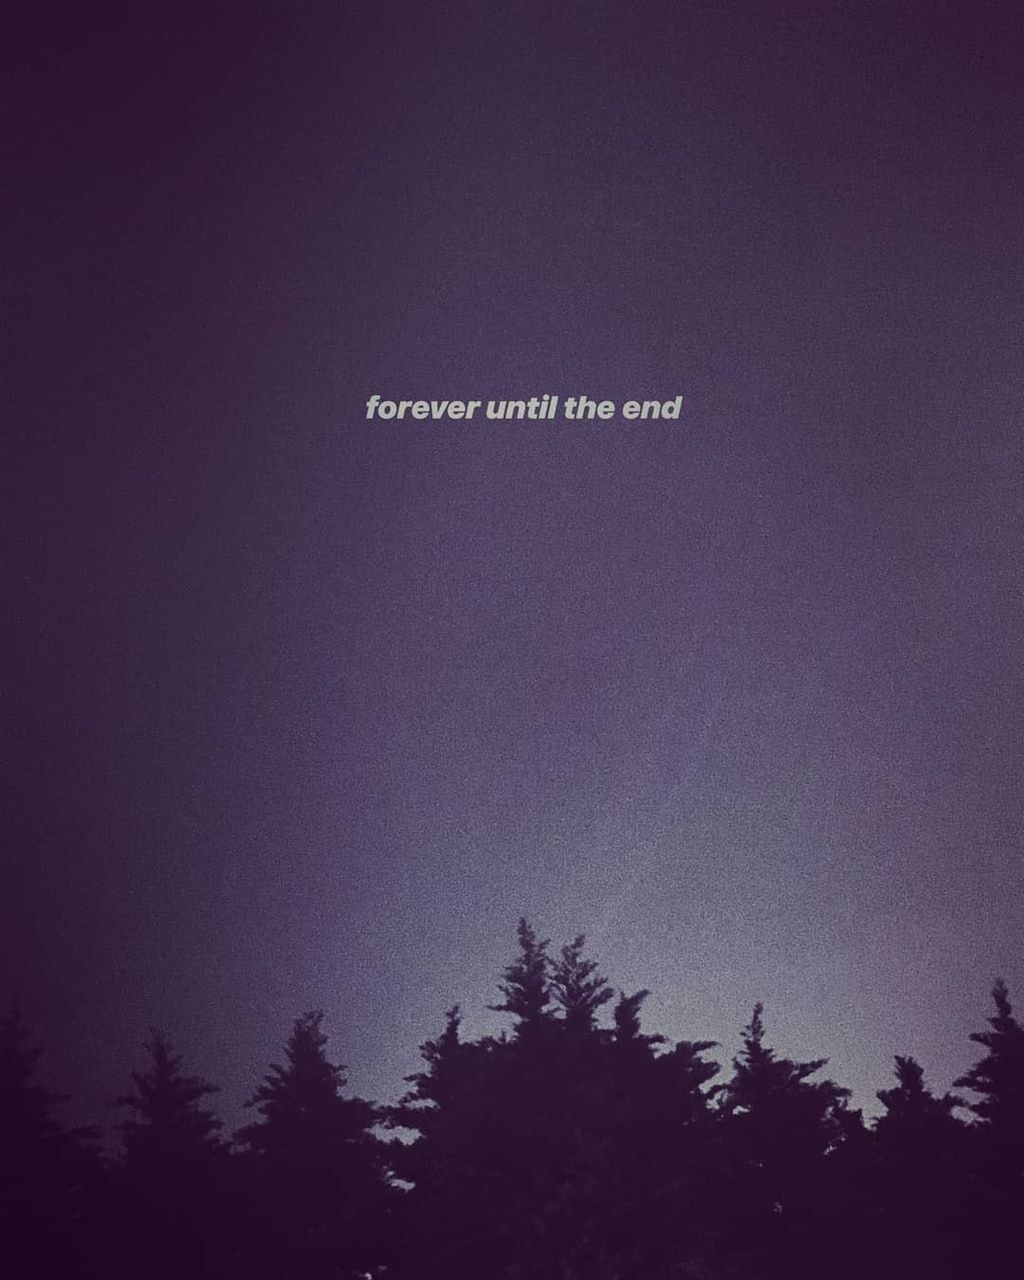 A dark sky with trees and the words forever still - Depressing